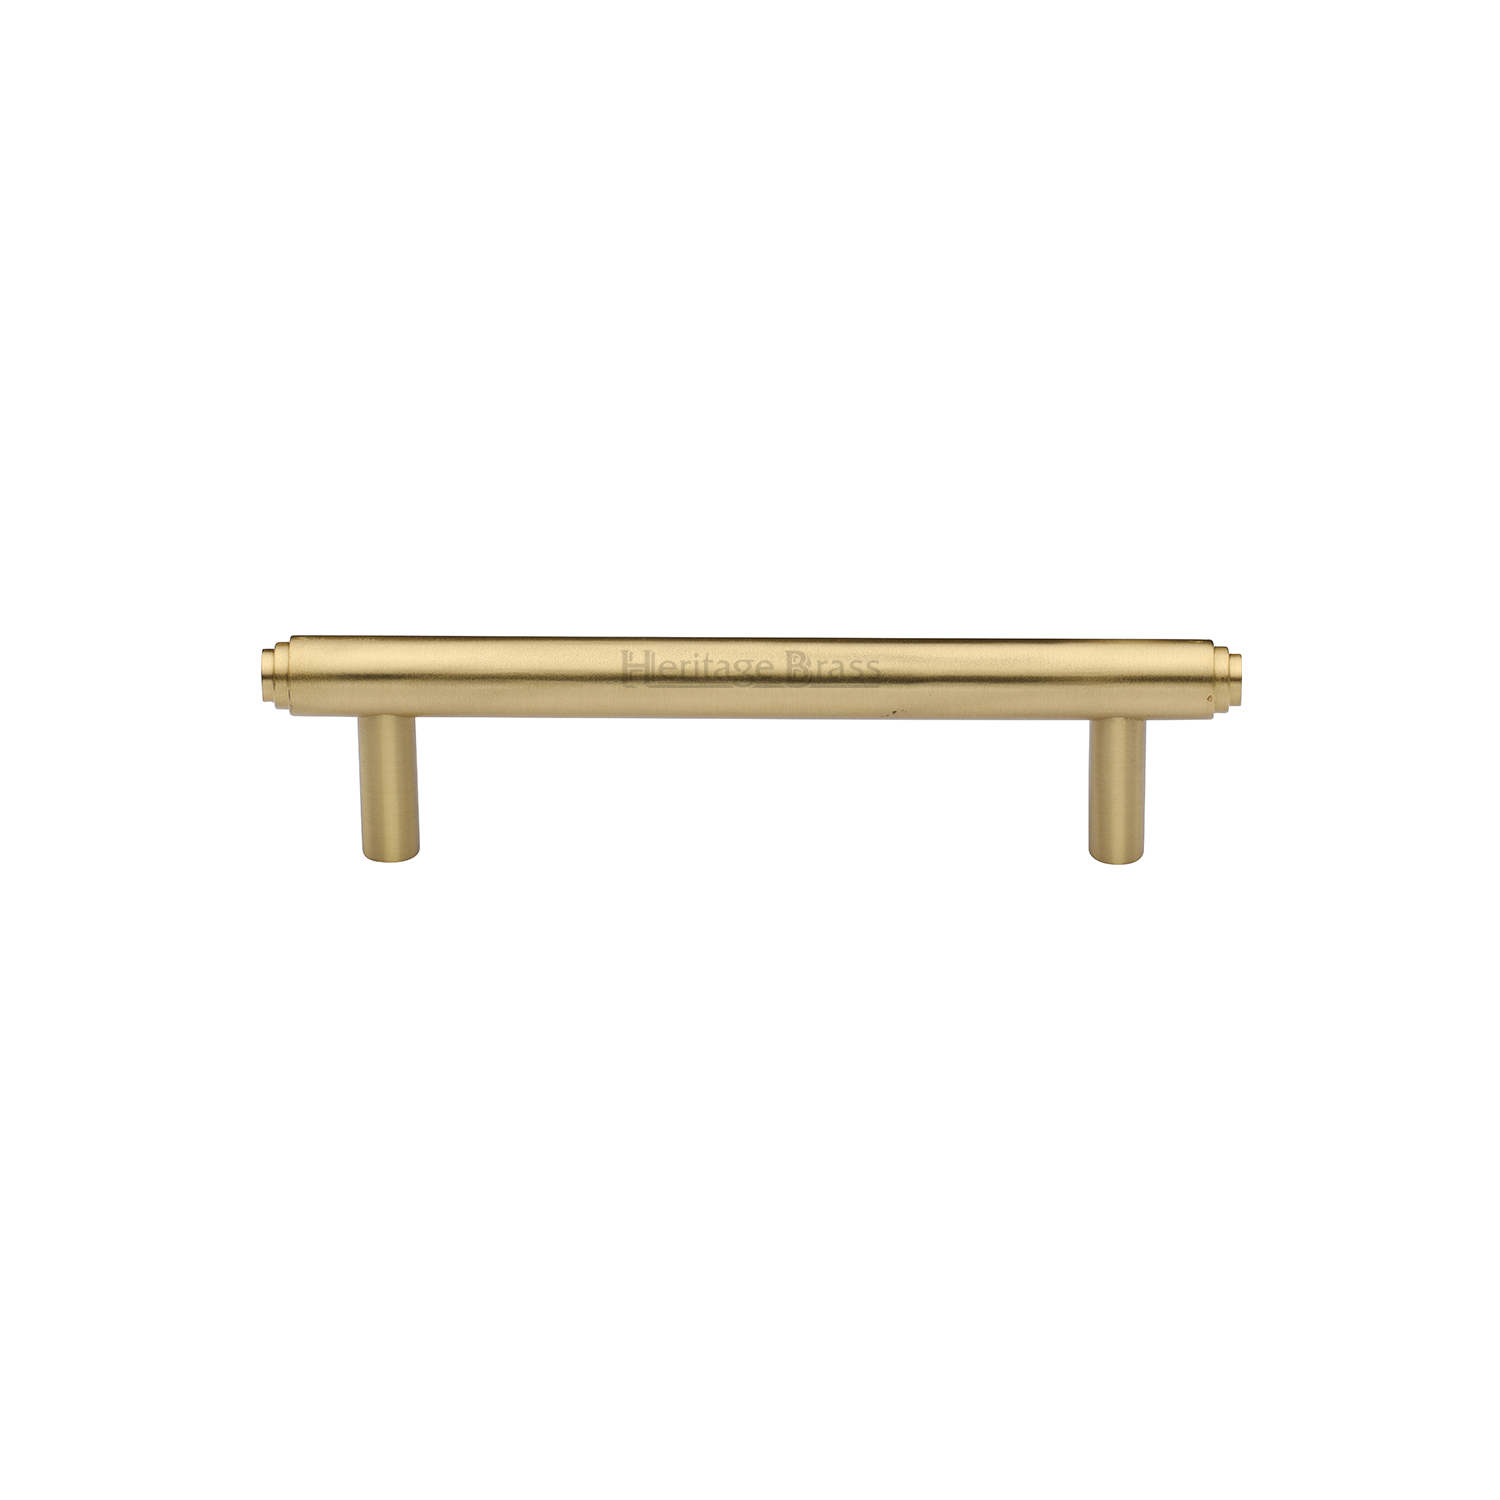 Heritage Brass Cabinet Pull Stepped Design 96mm c/c